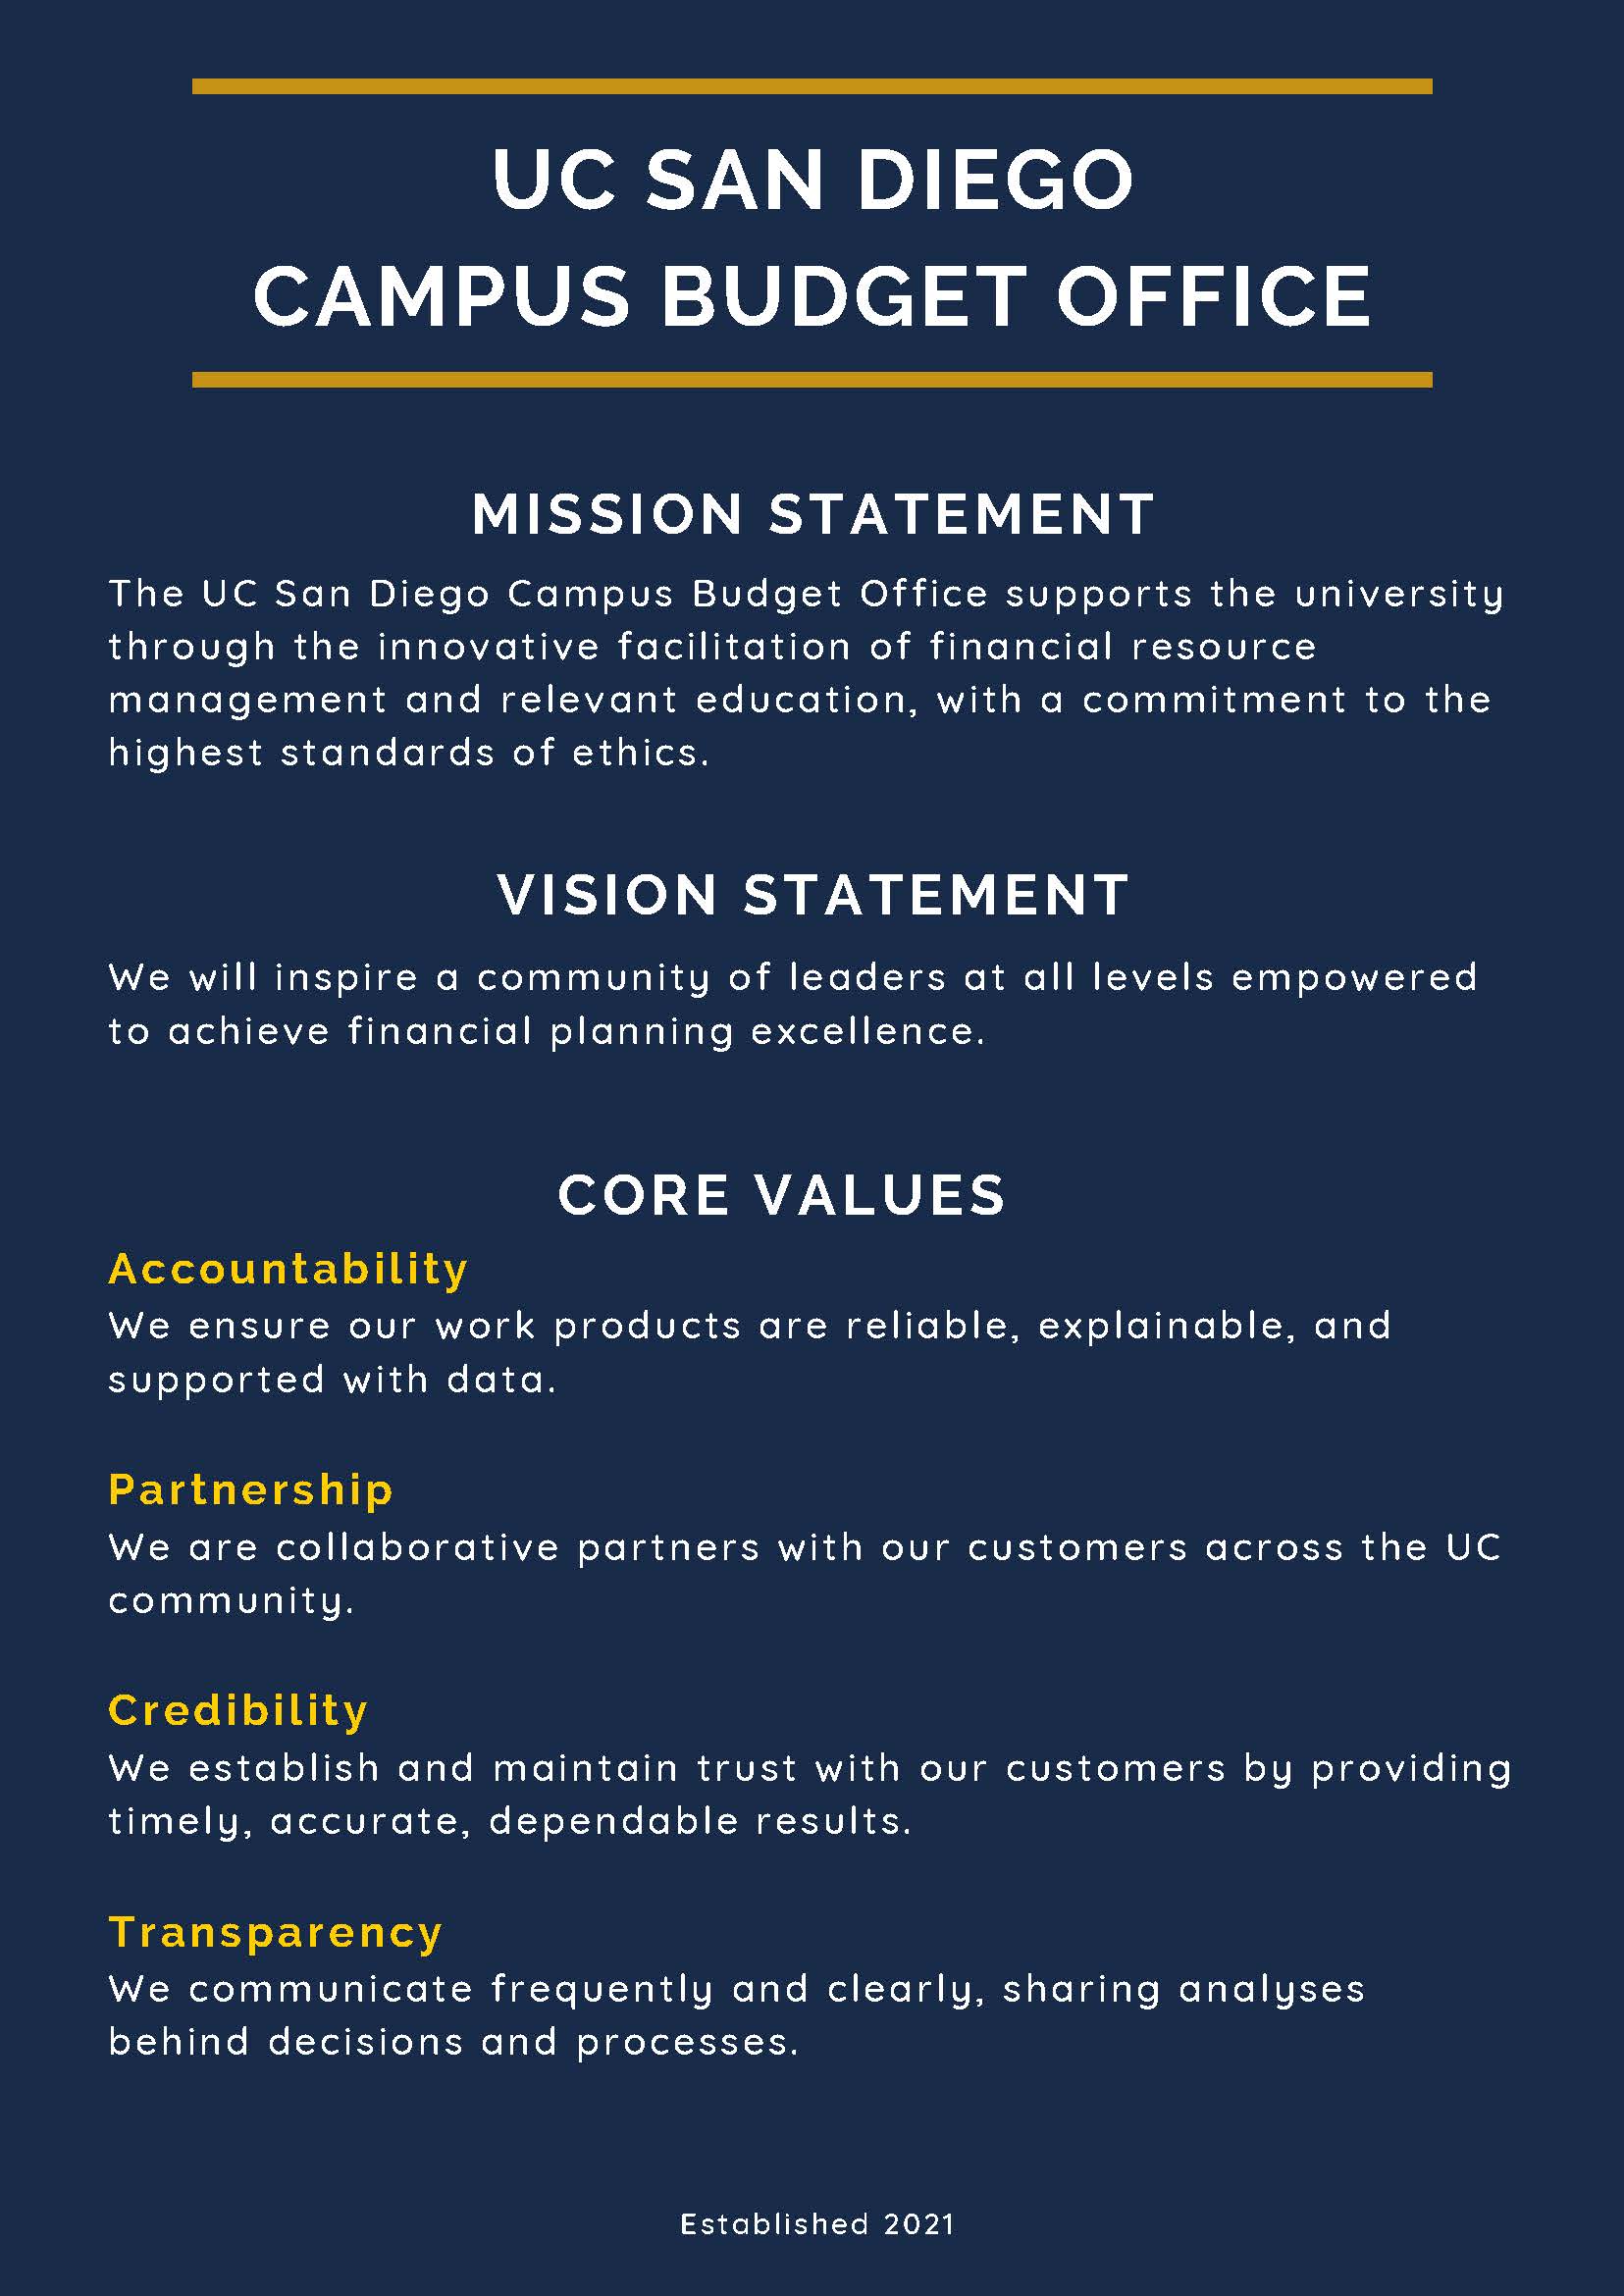 CBO Mission, Vision & Values Statements